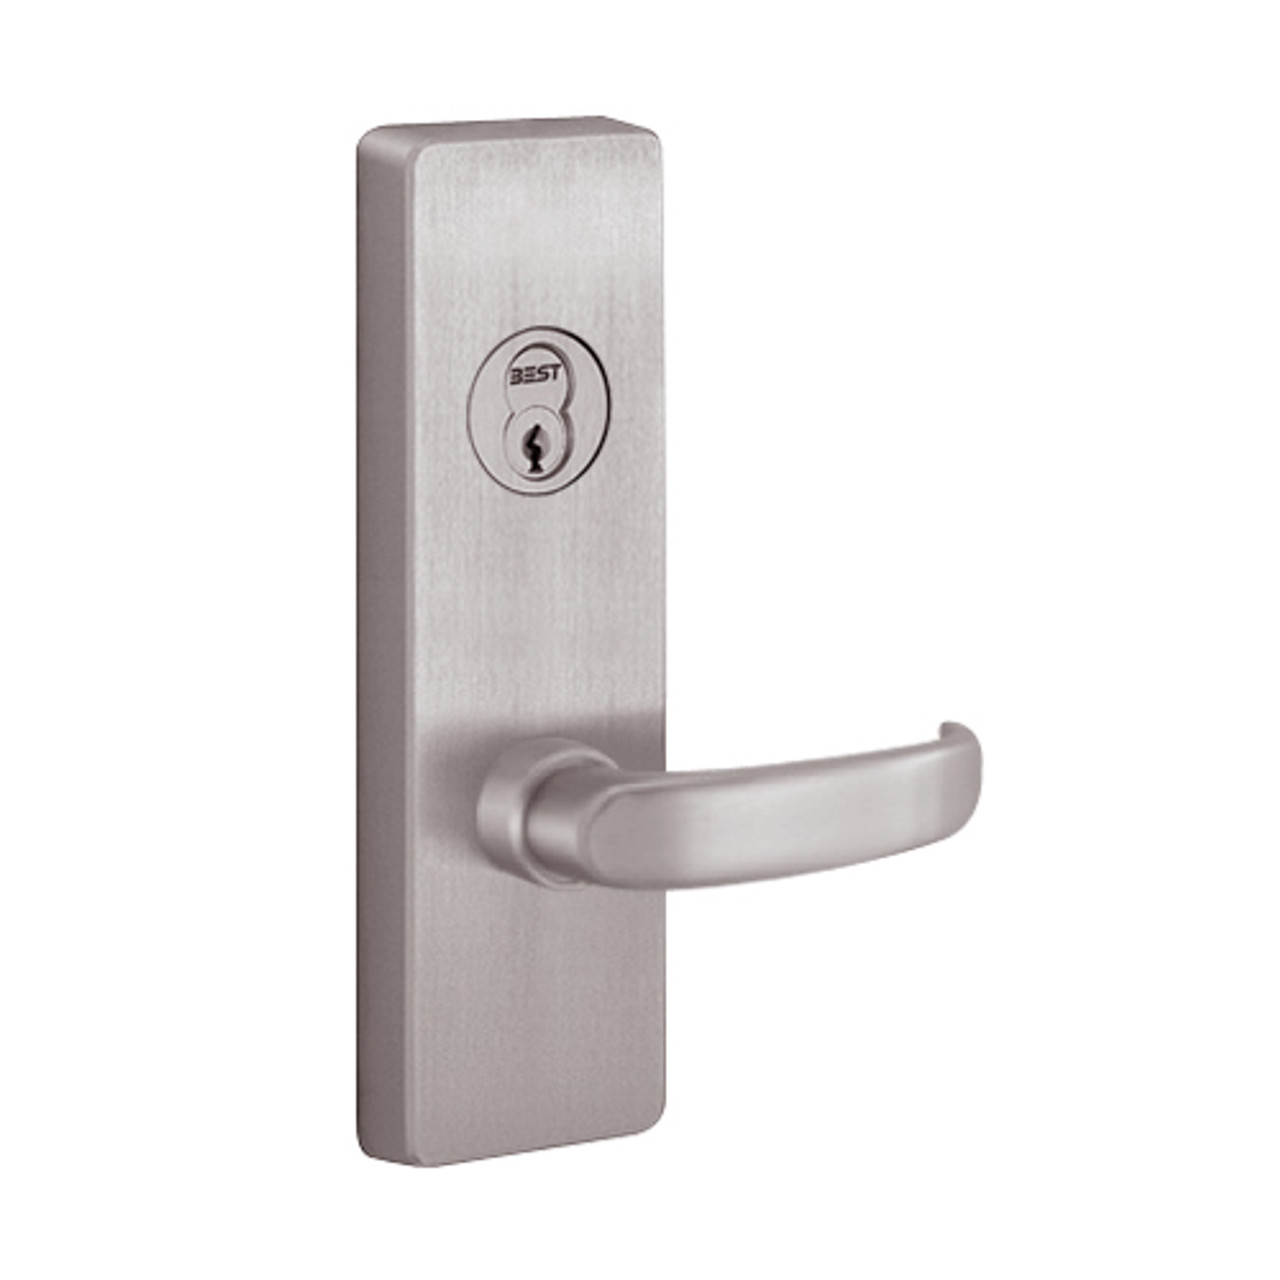 VM4908D-630-LHR PHI Key Controls Lever Vandal Resistant Trim with D Lever Design for Apex and Olympian Series Exit Device in Satin Stainless Steel Finish